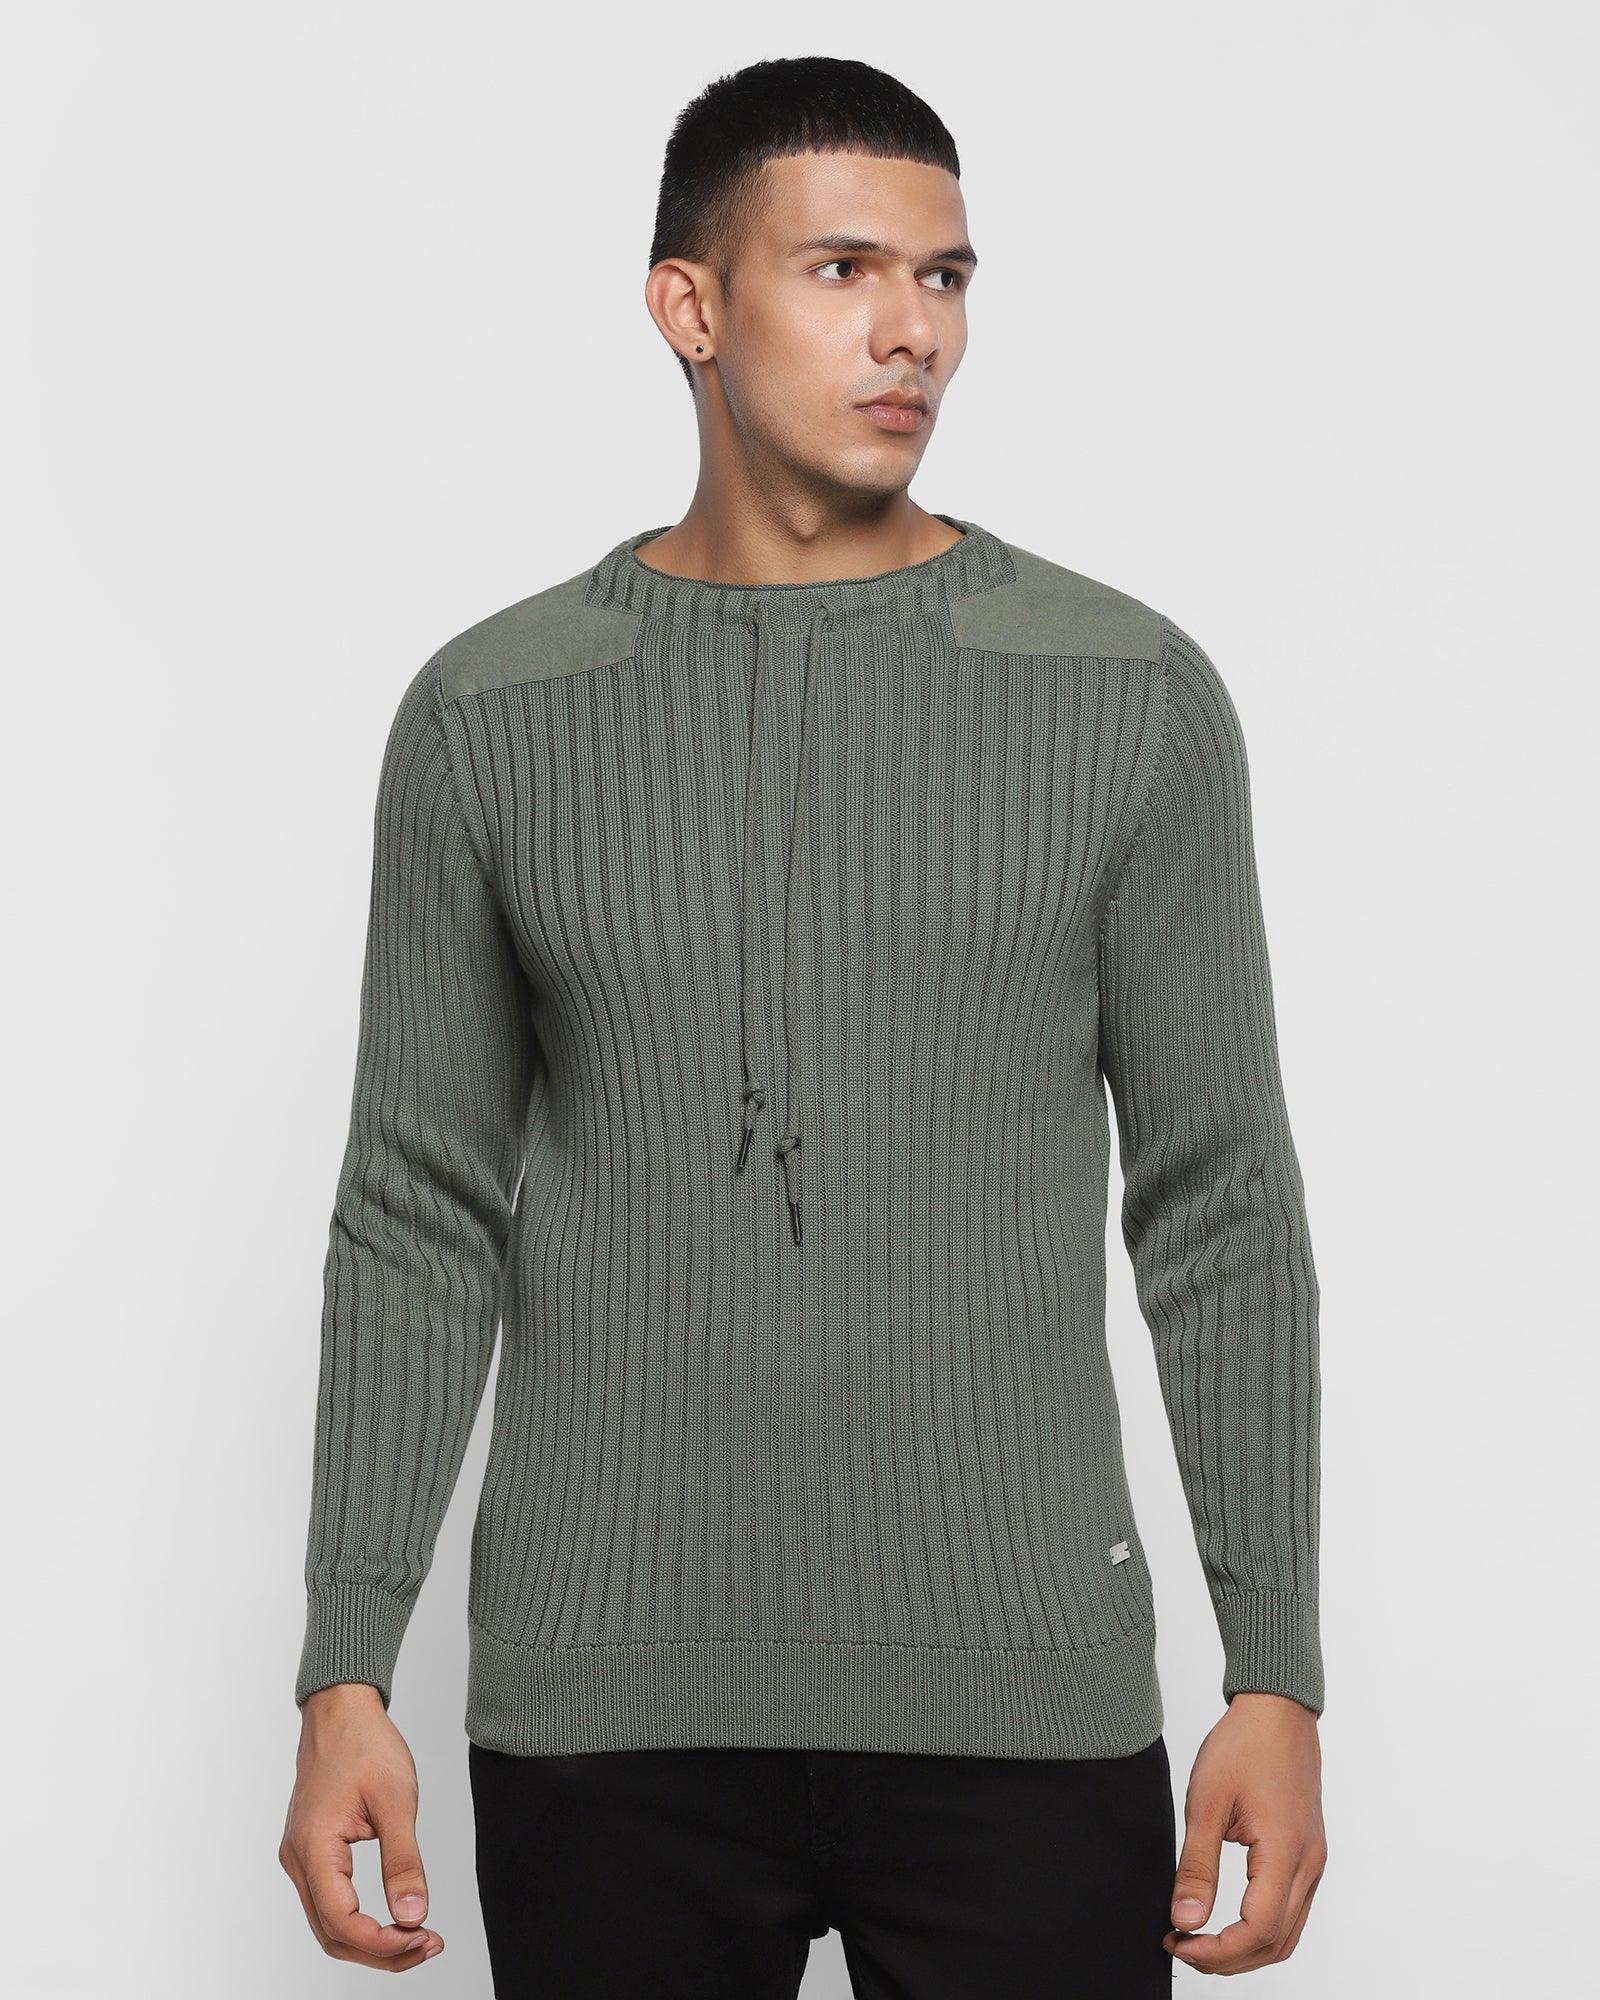 crew neck green textured sweater - lucy